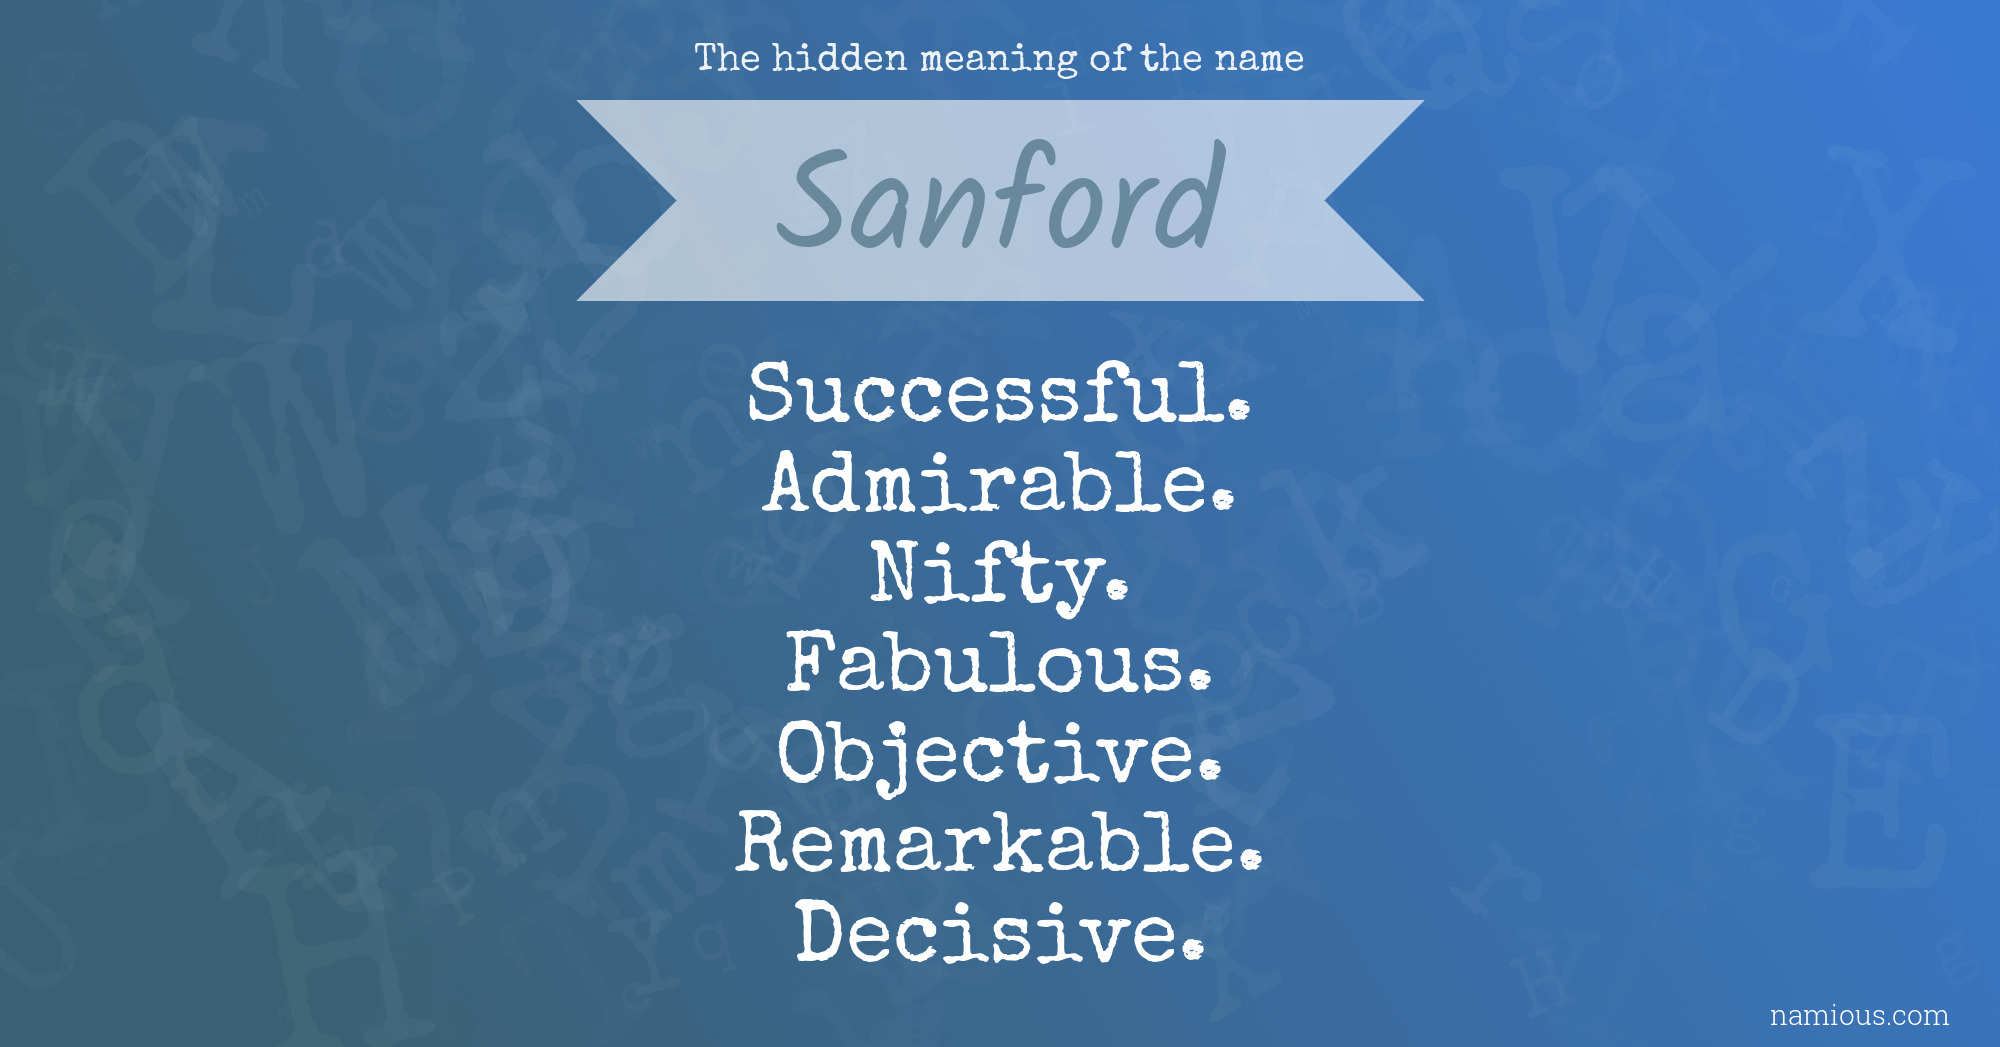 The hidden meaning of the name Sanford